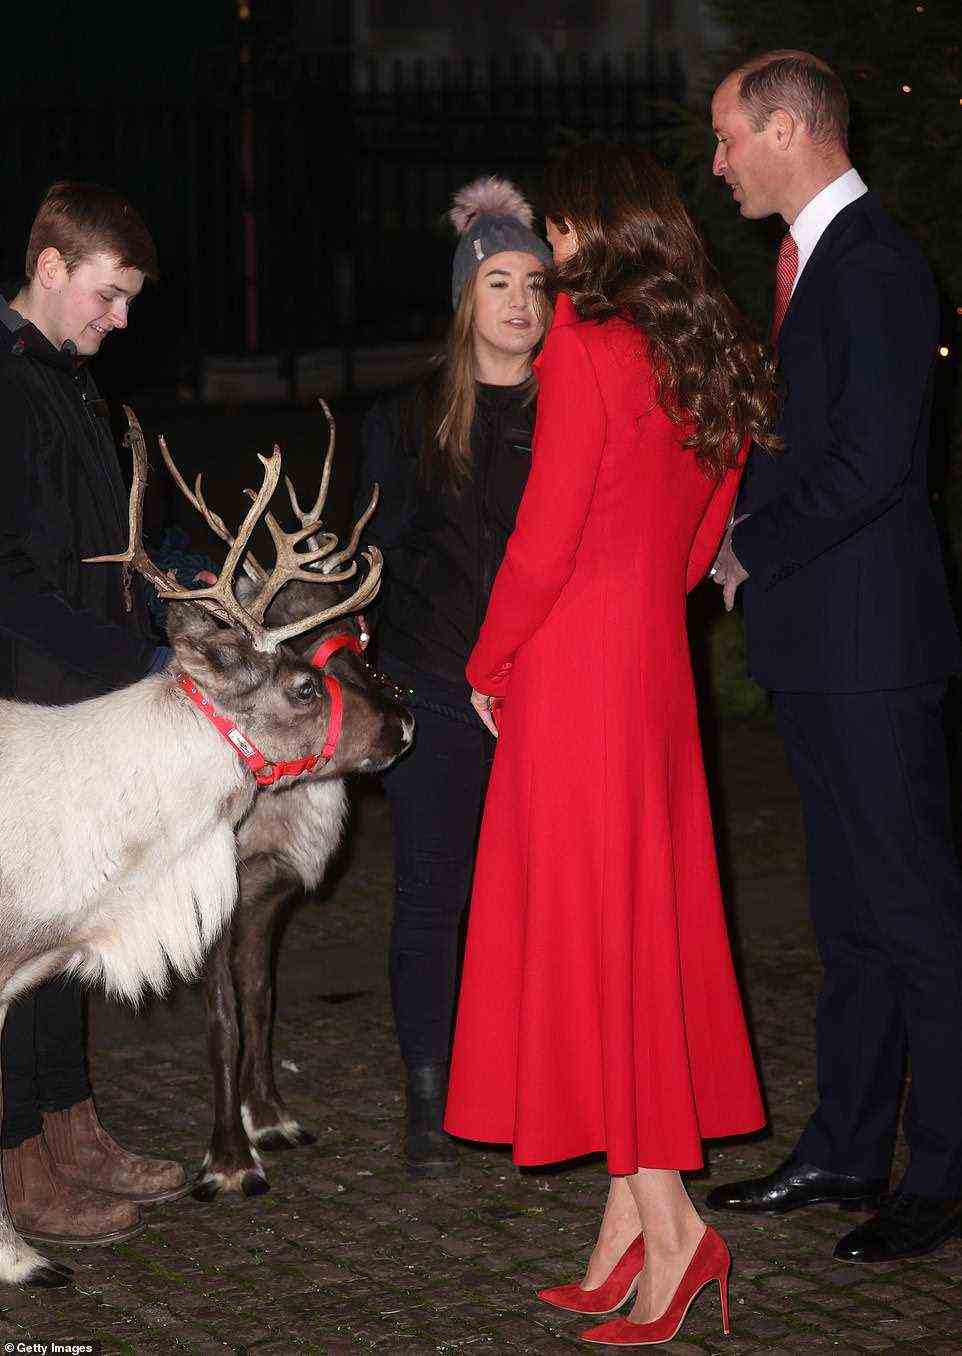 A festive friend! As the Duke and Duchess of Cambridge arrived at the event, they were greeted by two reindeers (pictured)